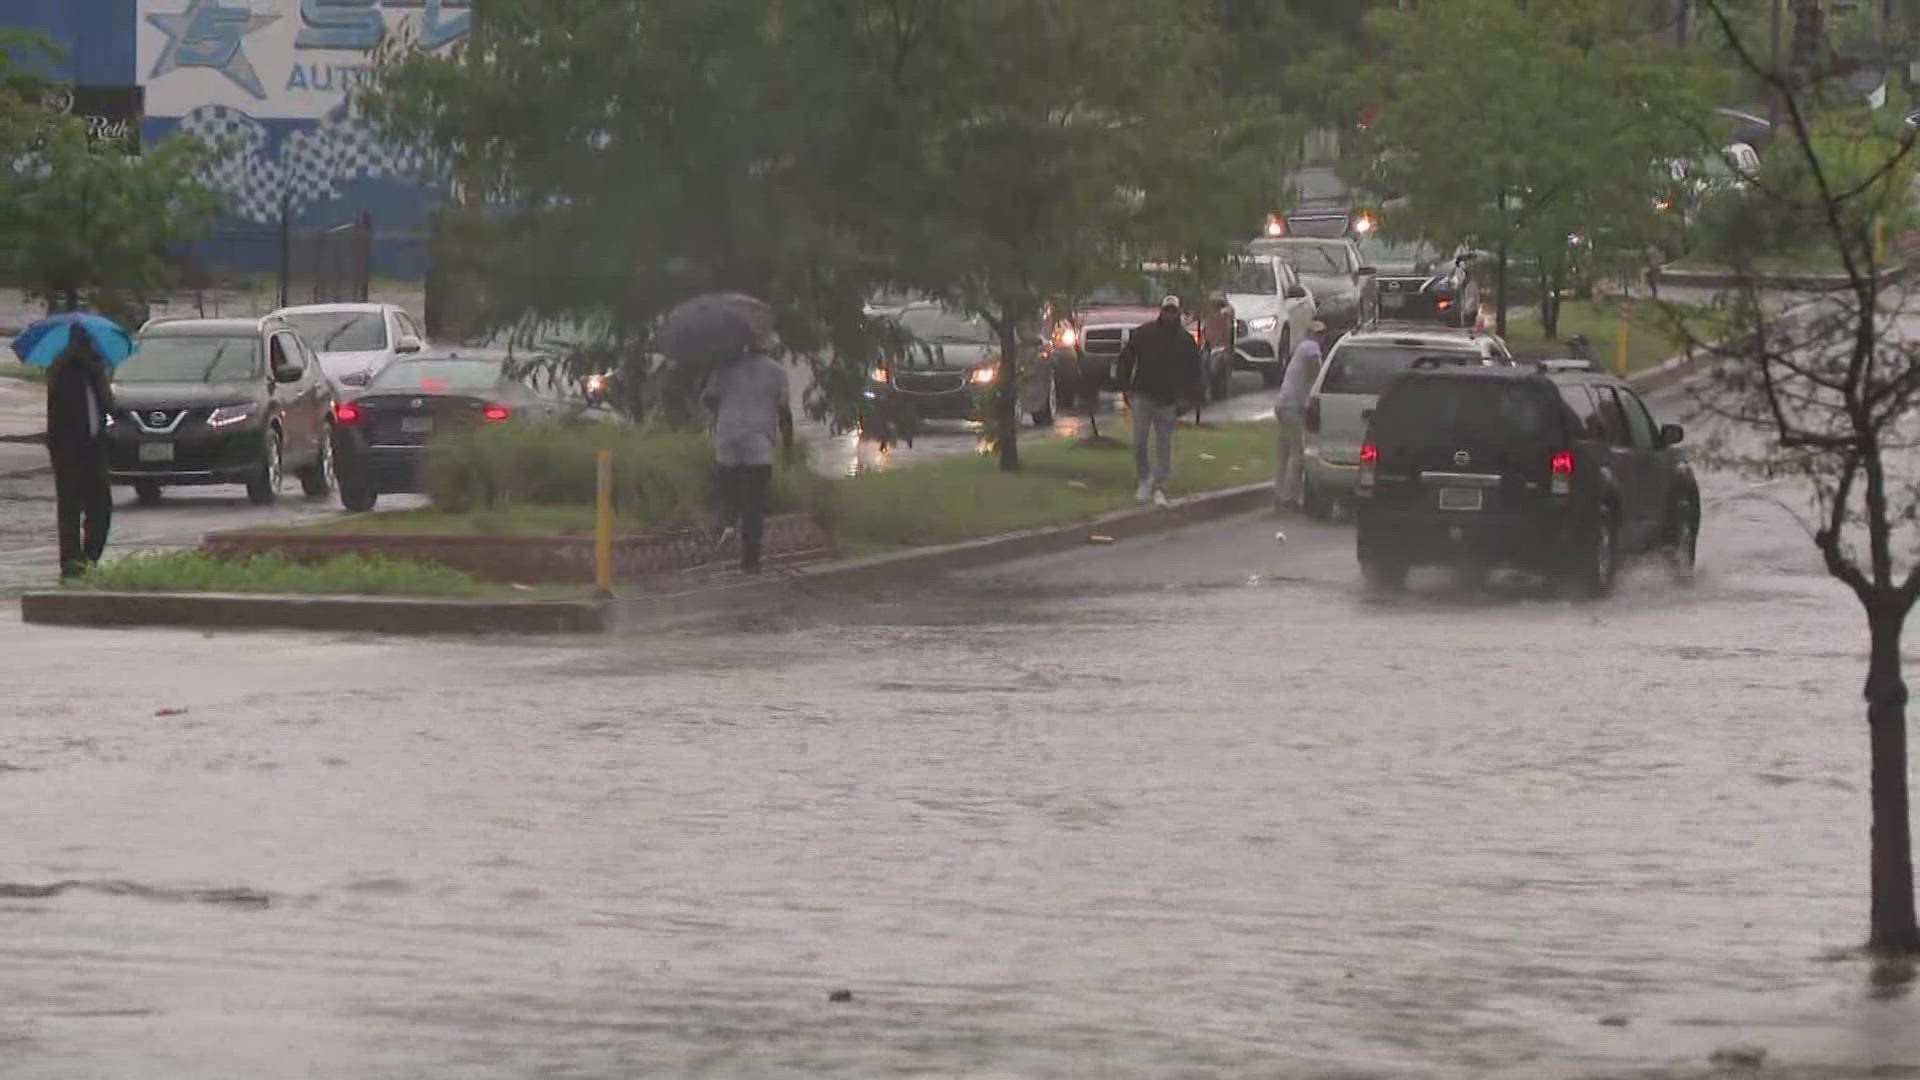 As some cars were stuck in the roadway, others were still trying to drive through. Remember: Turn around, don't drown.